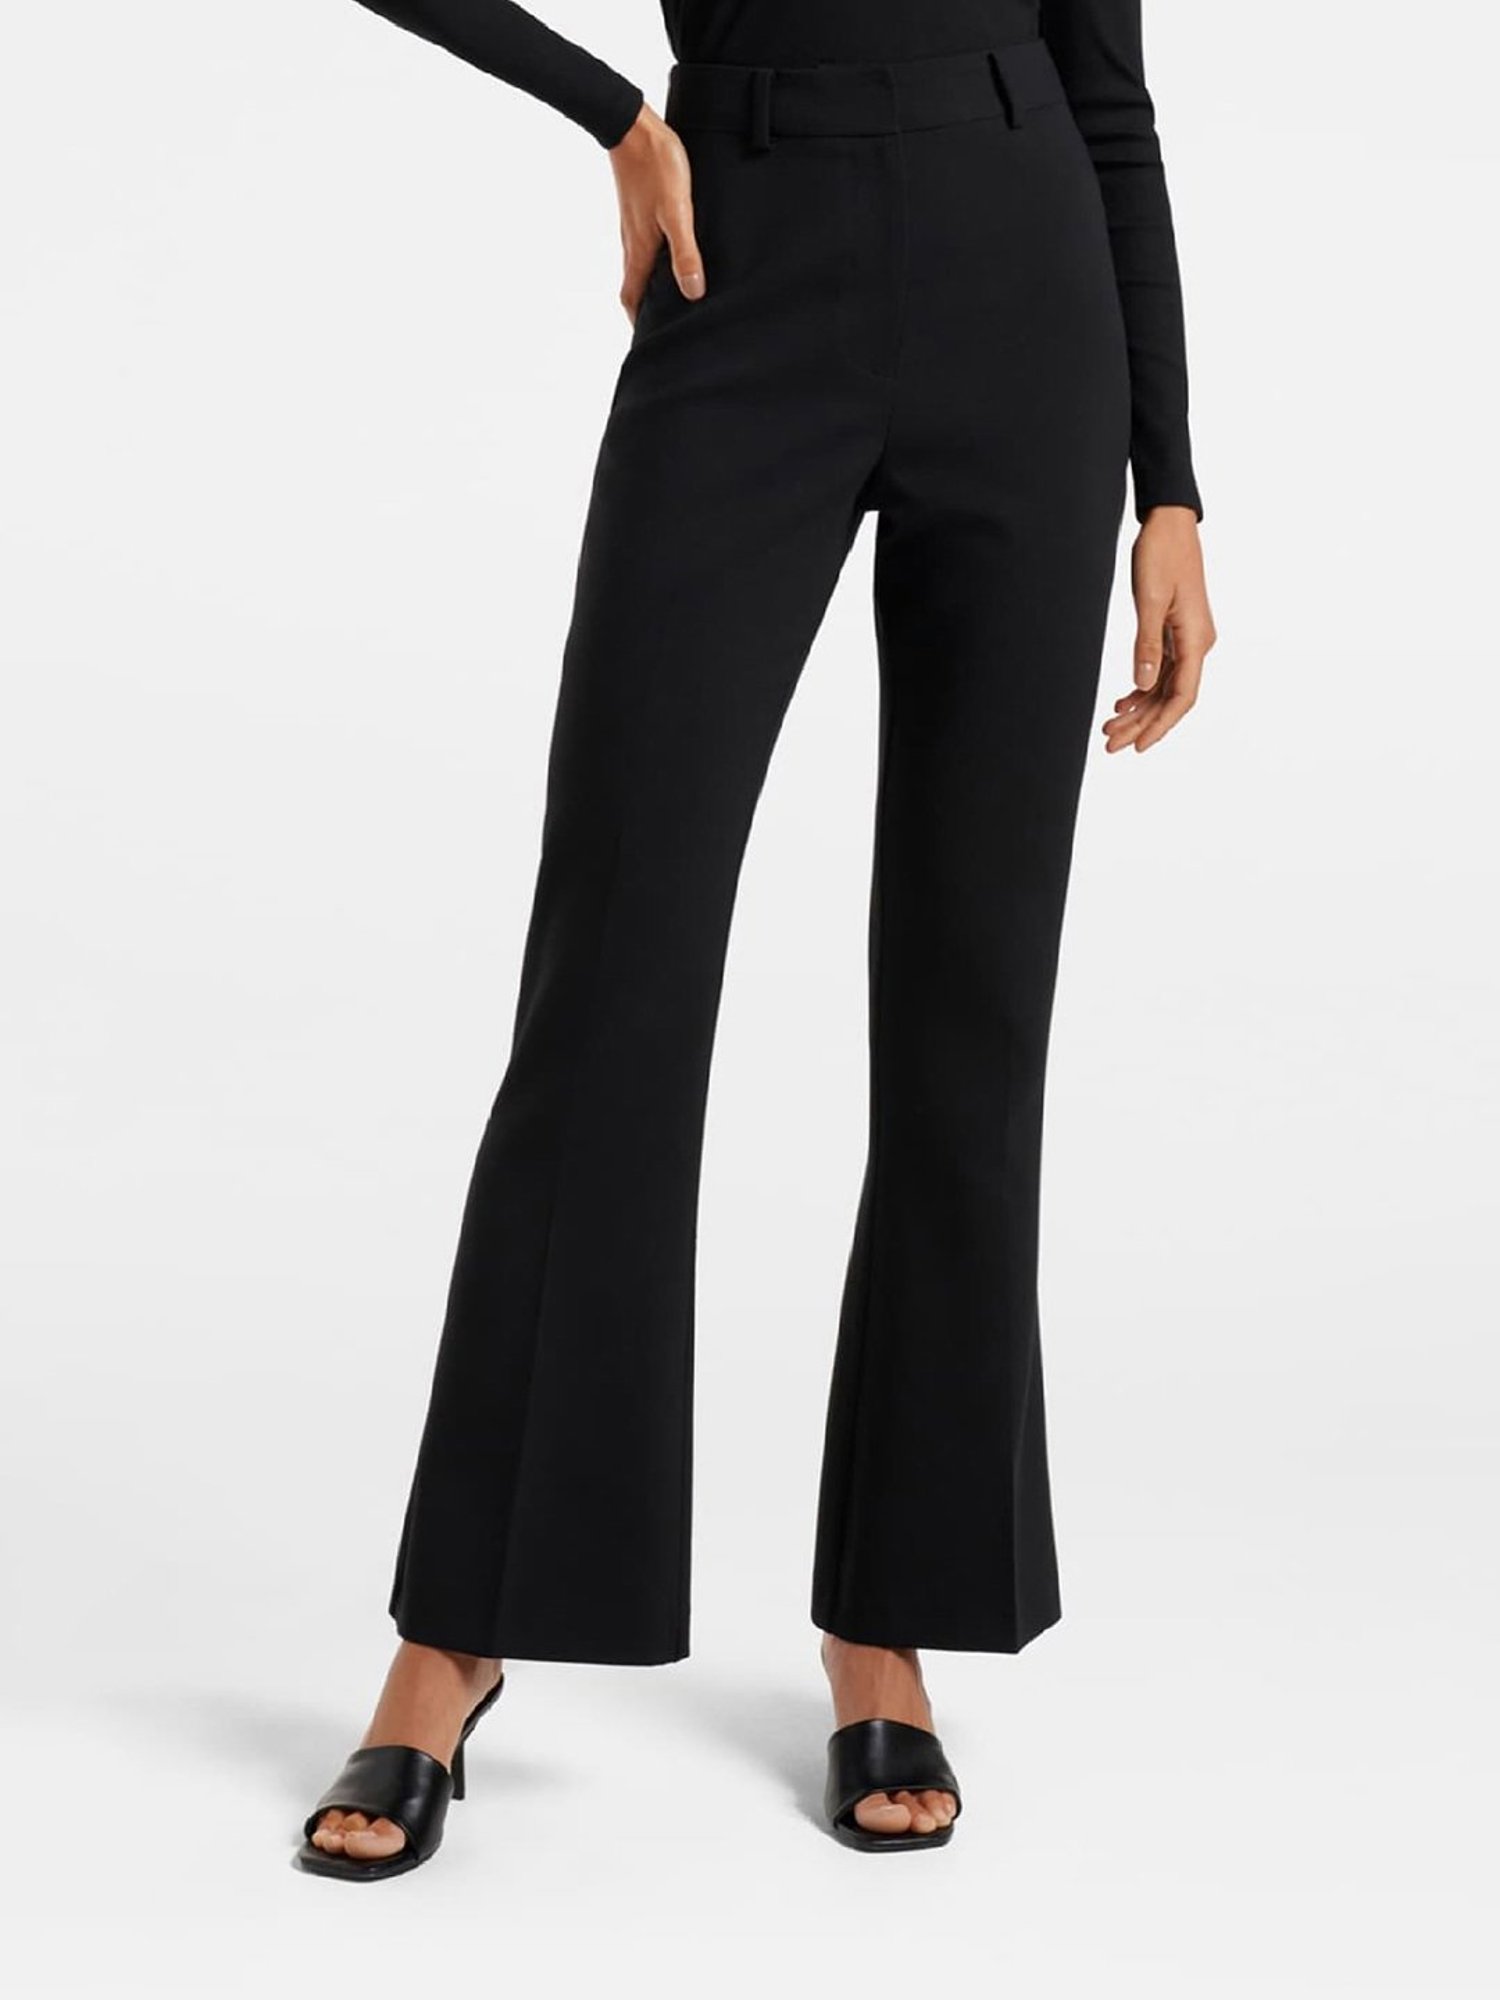 Forever new straight leg formal black pants, Women's Fashion, Bottoms,  Other Bottoms on Carousell